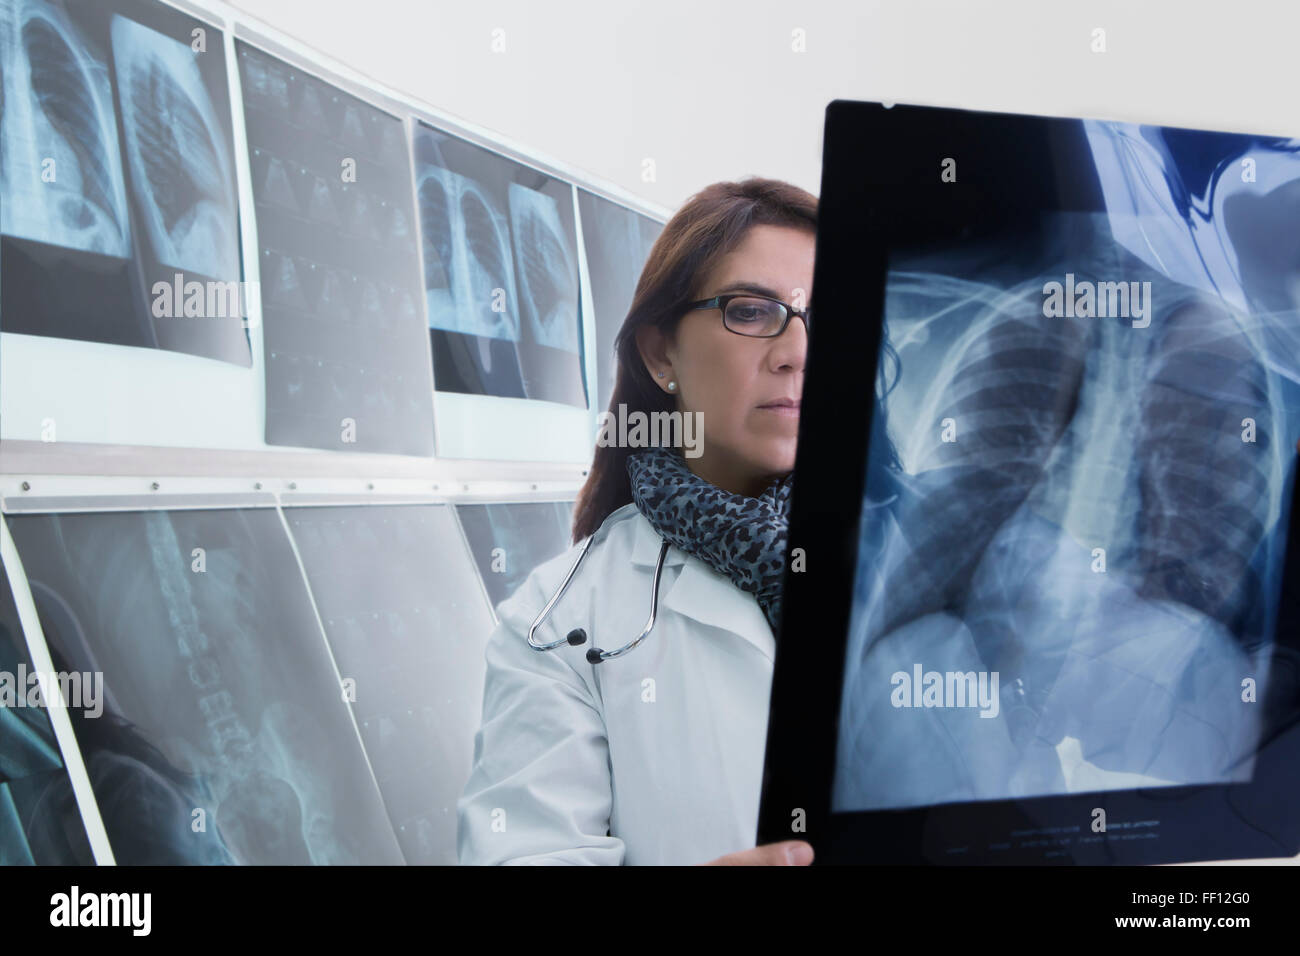 Doctor examining x-rays in hospital Banque D'Images